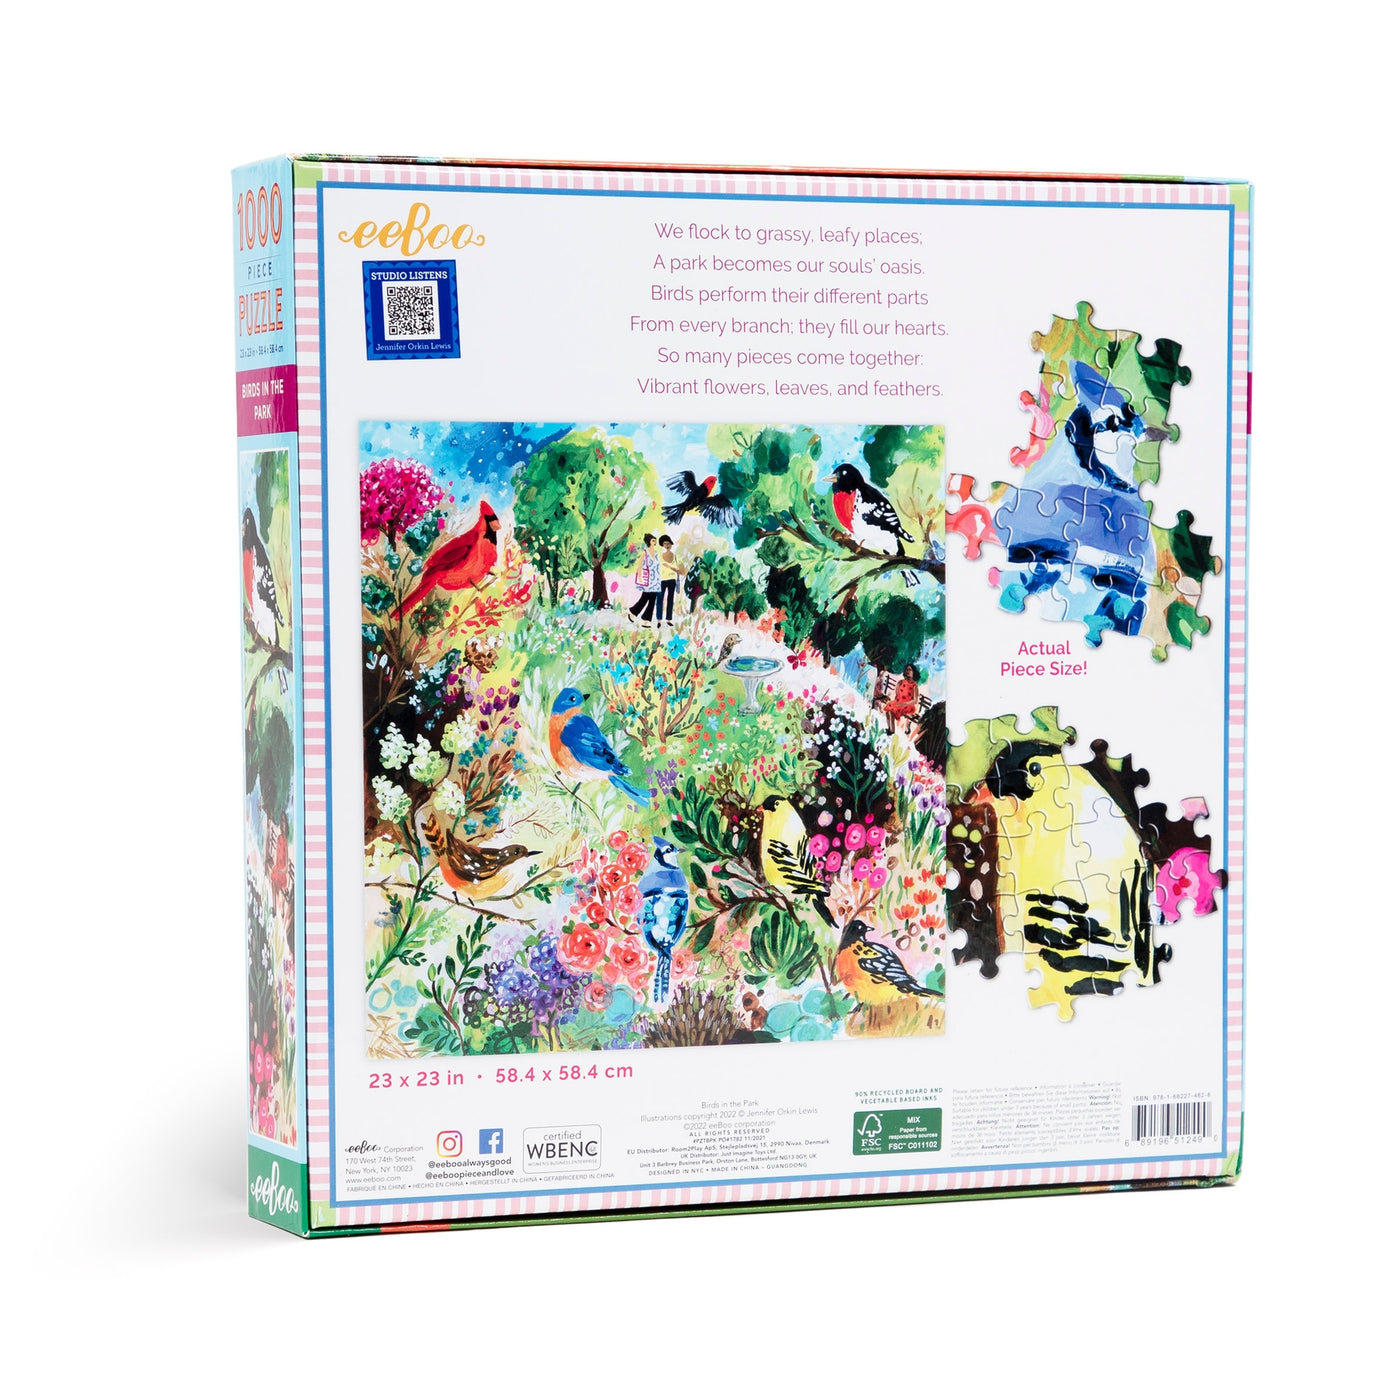 Birds in the Park | 1,000 Piece Jigsaw Puzzle